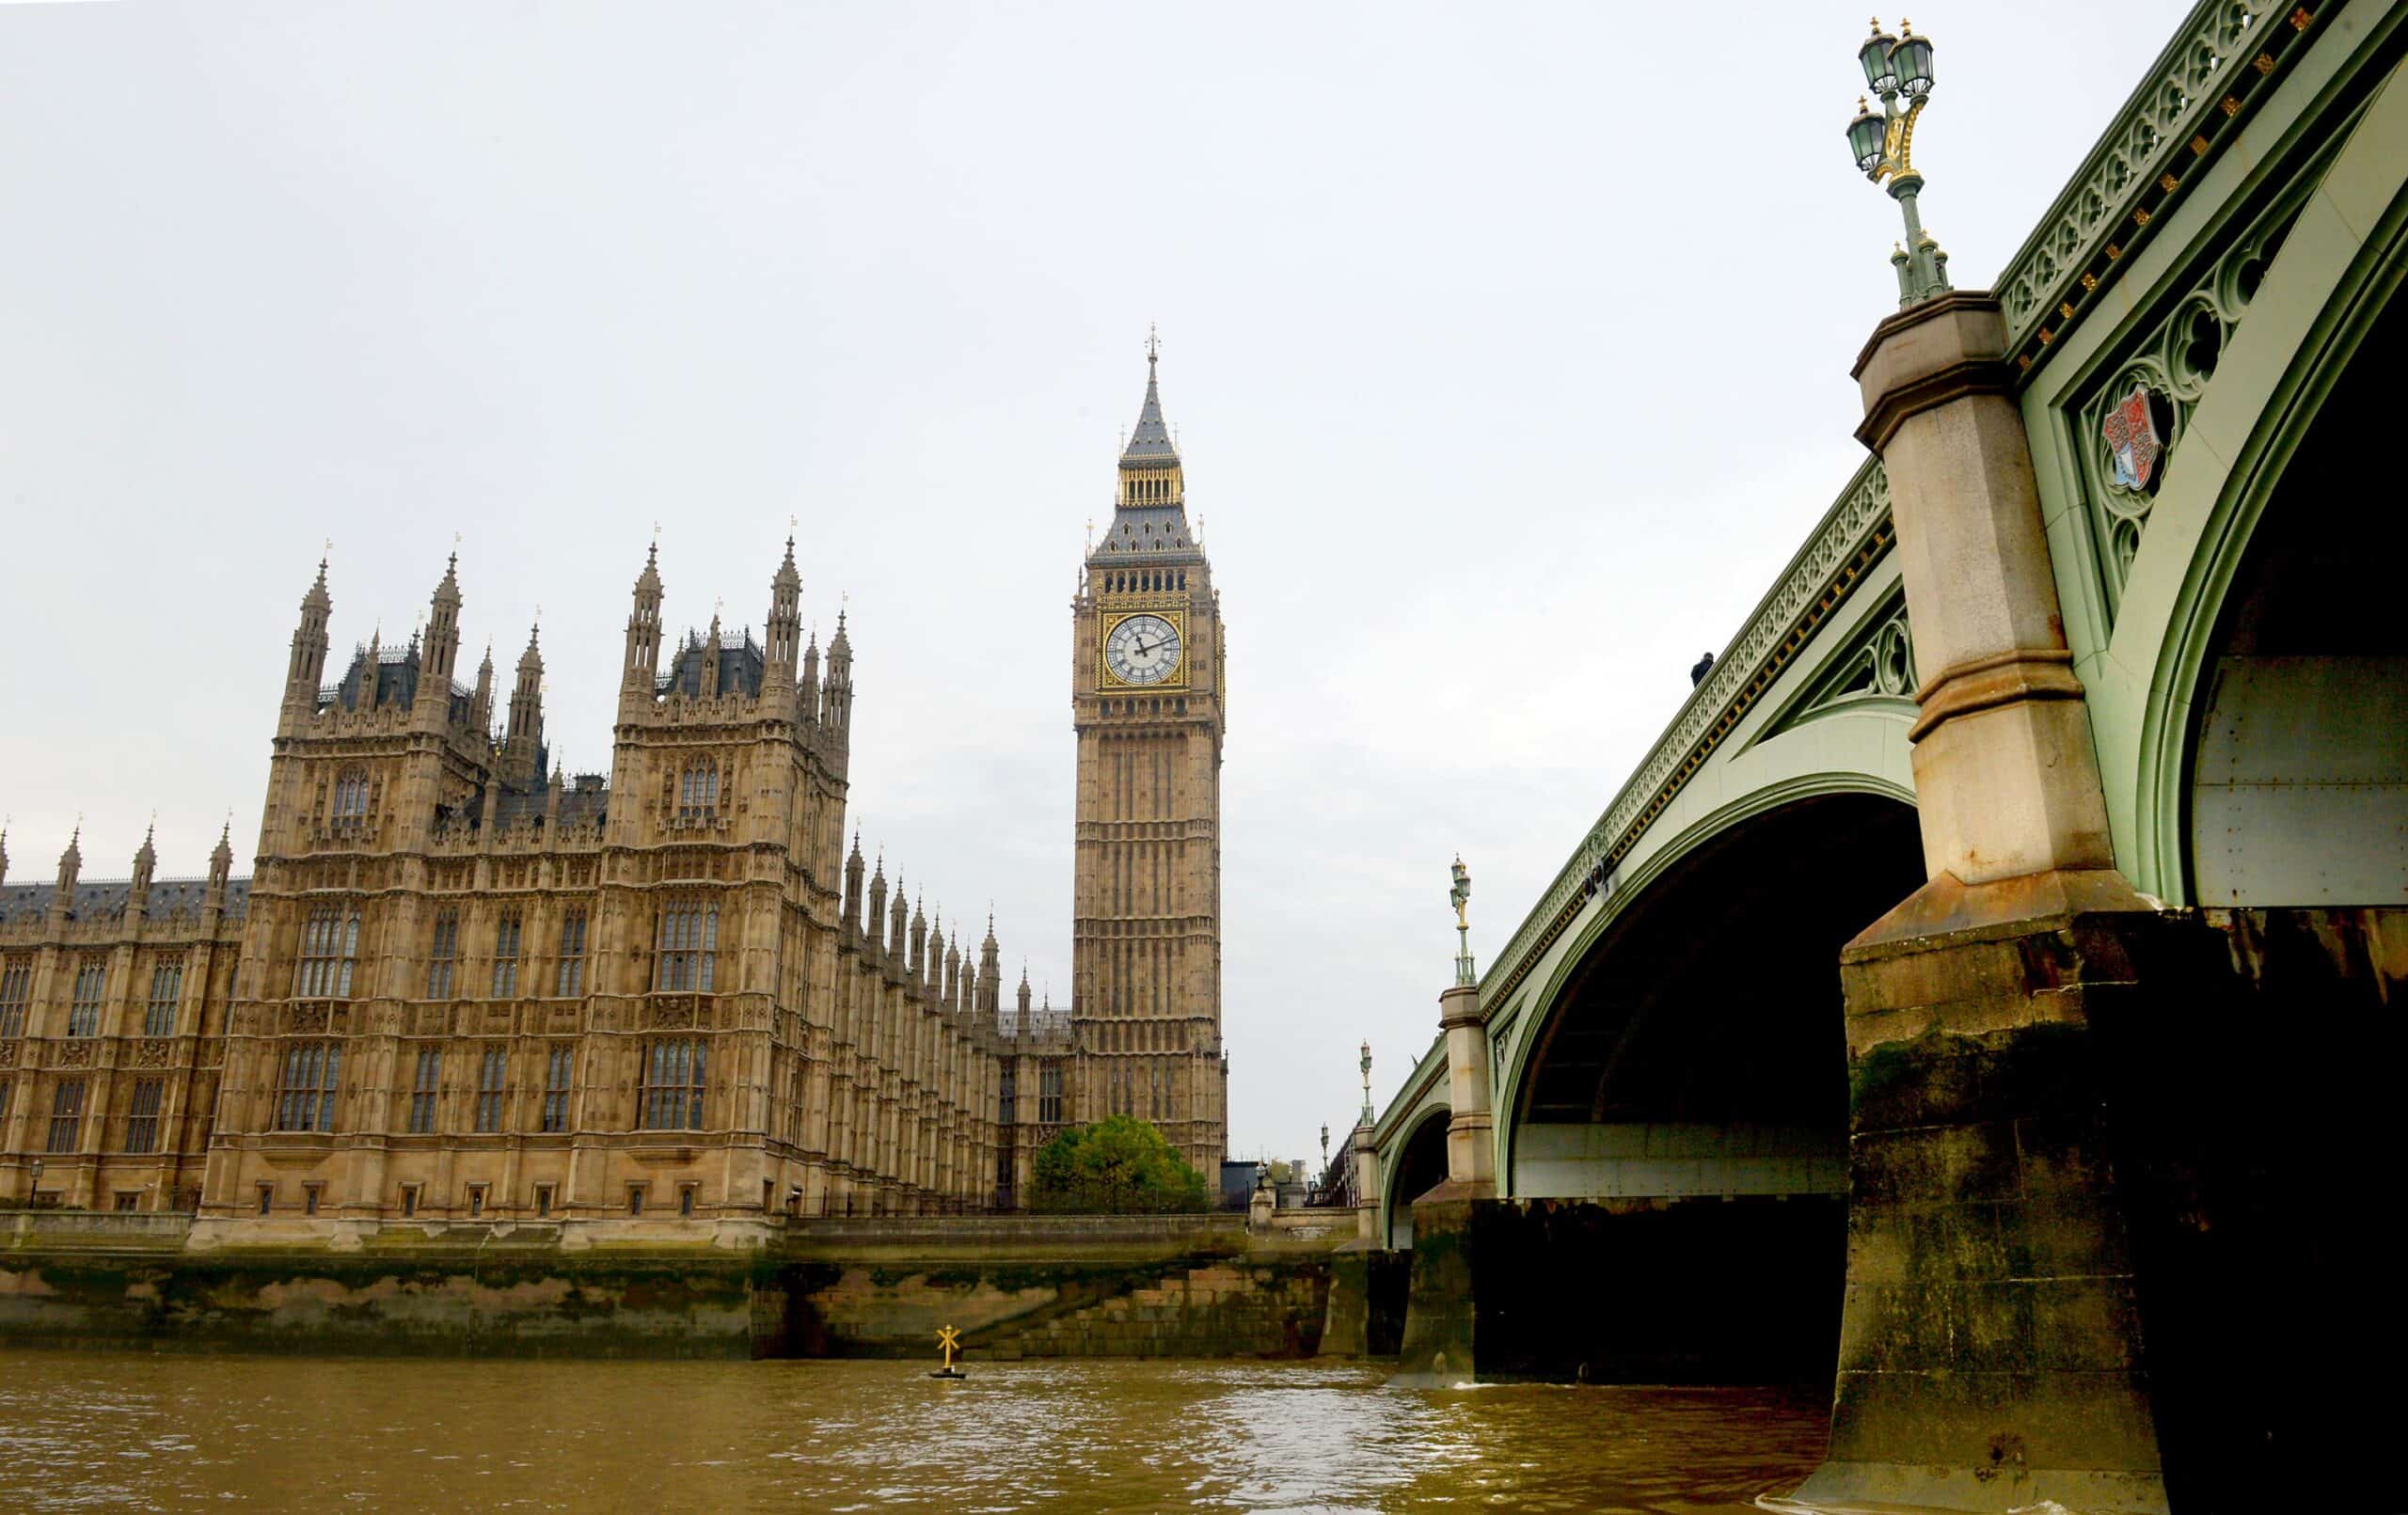 MPs engaged in ‘sex and heavy drinking’ on trips abroad – reports